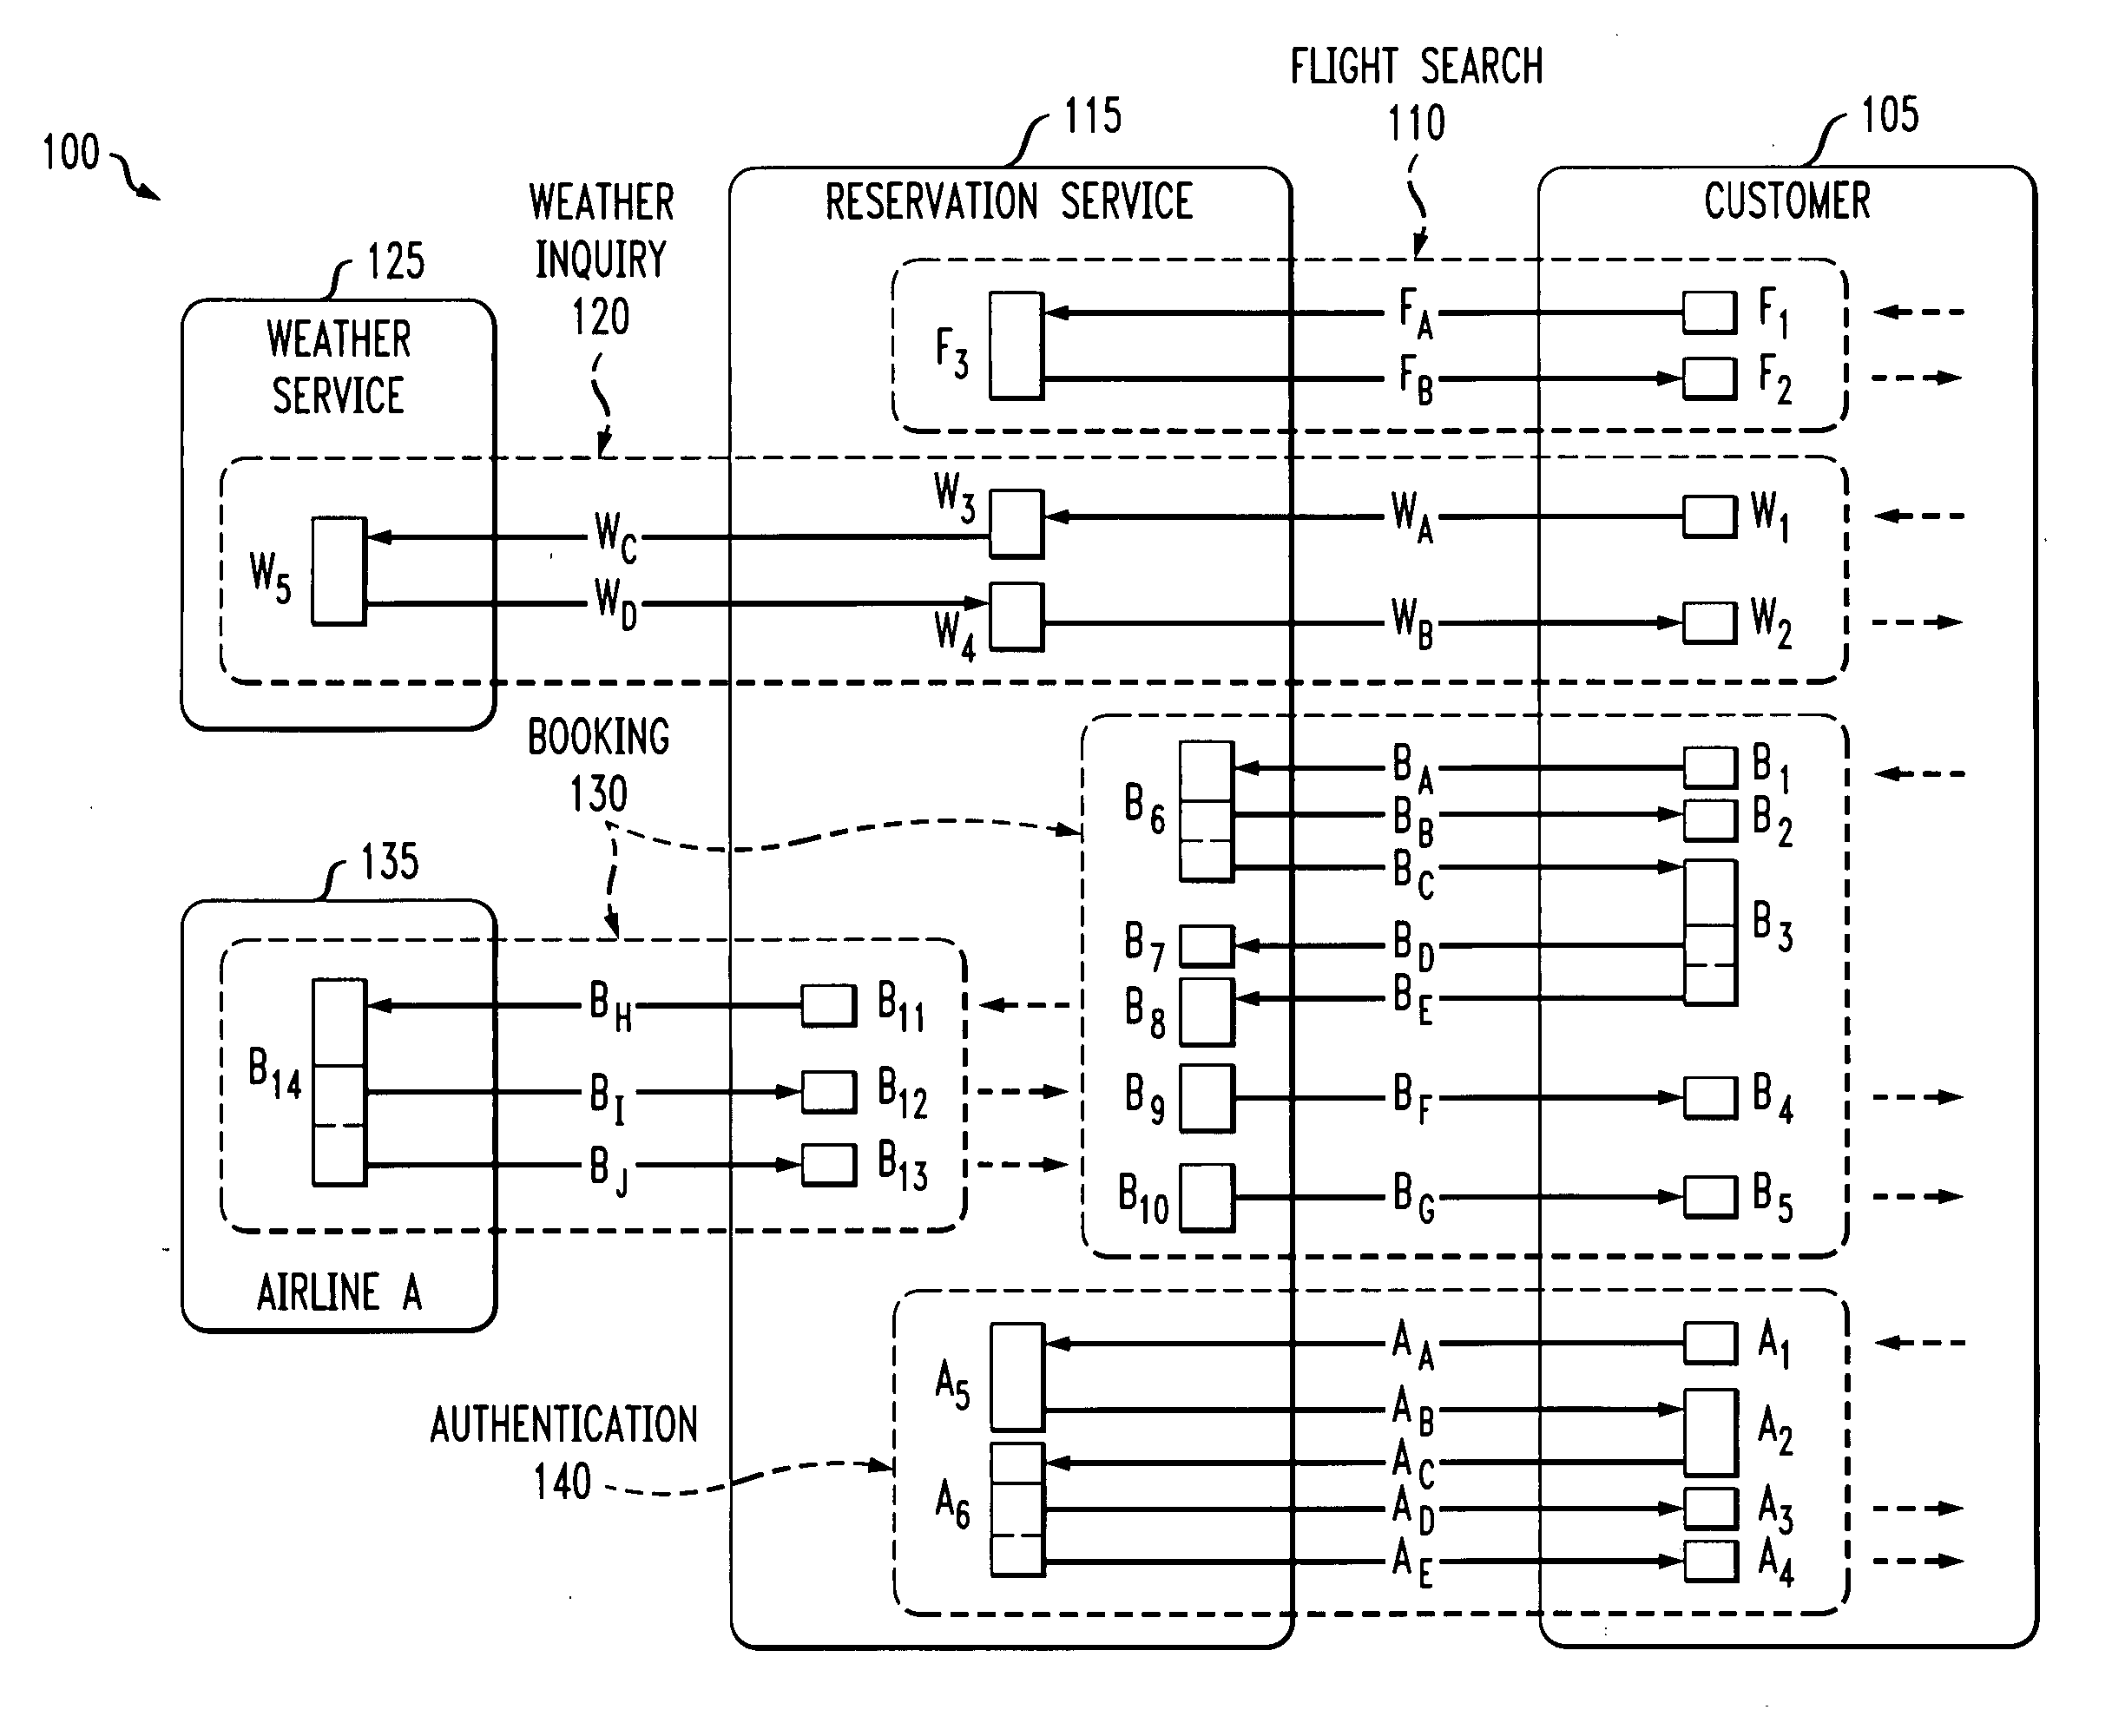 Method and apparatus for designing web services using a sequence and multiplex architectural pattern